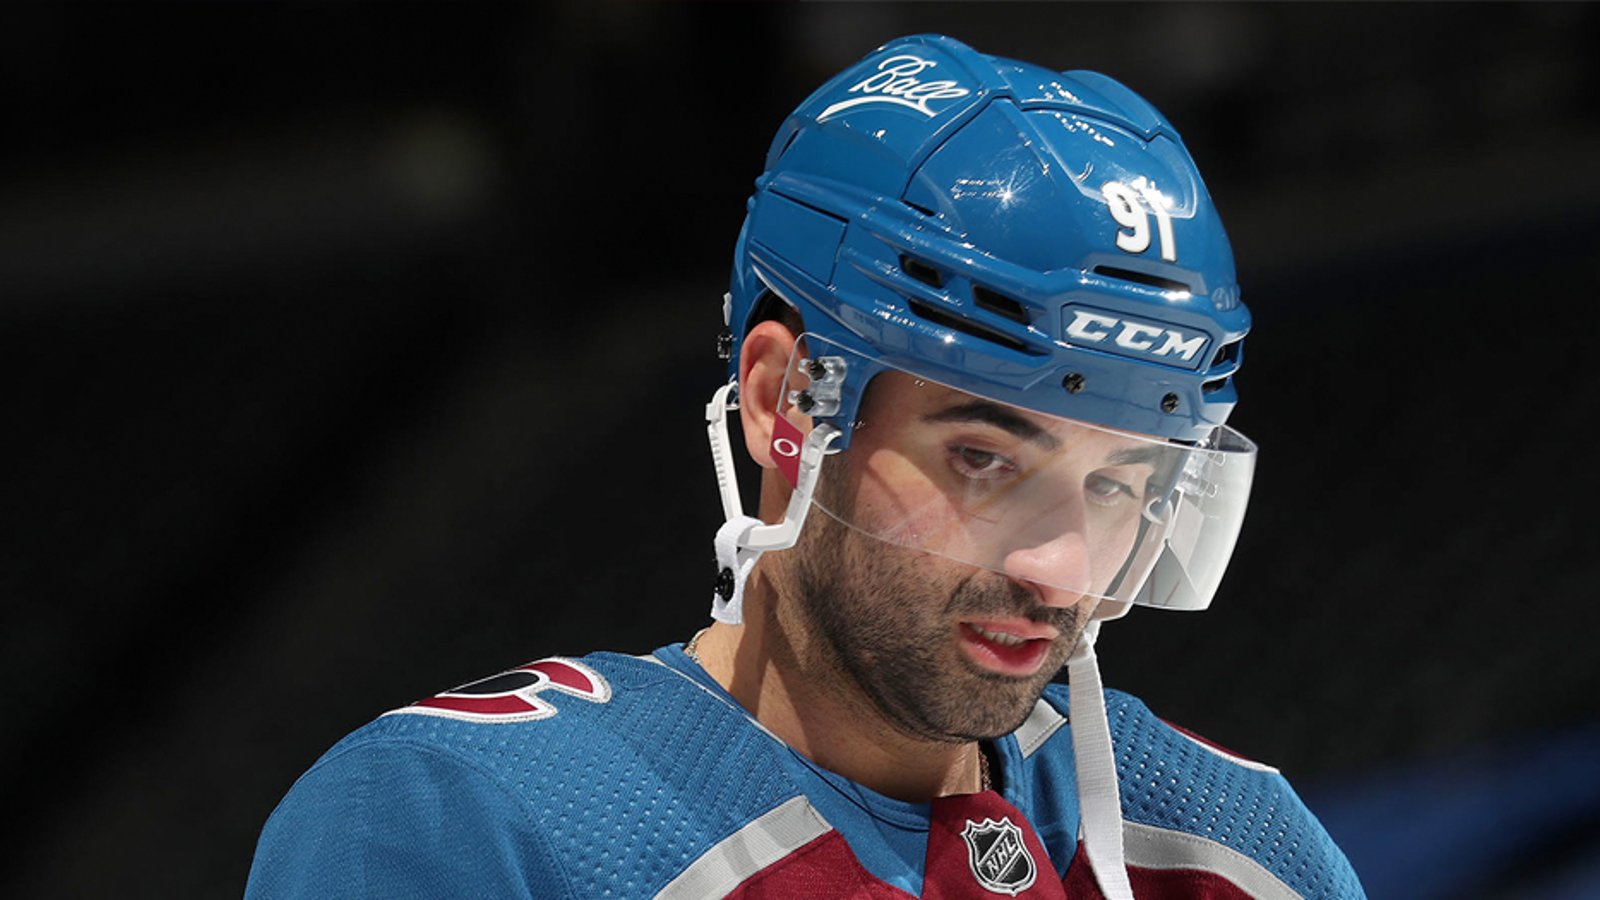 Kadri shares some of the hateful messages he received in the wake of Avs playoff loss